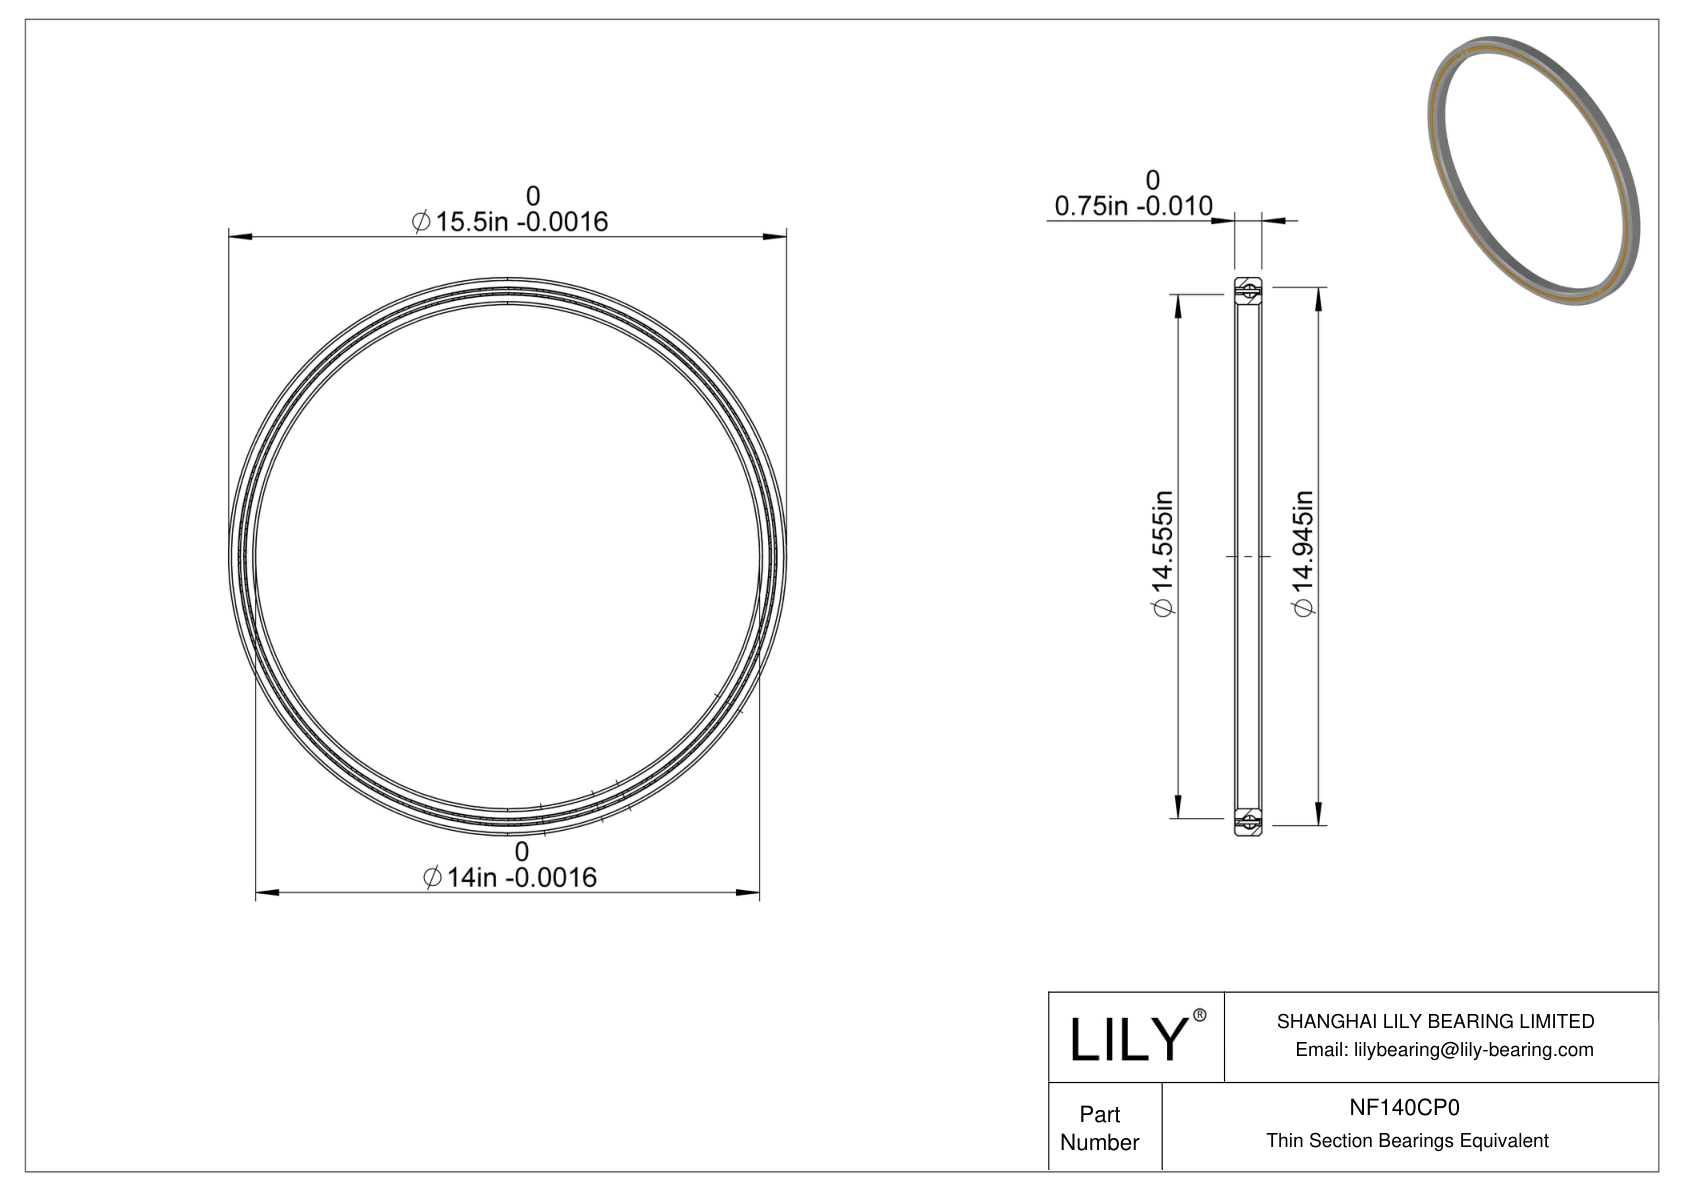 NF140CP0 Constant Section (CS) Bearings cad drawing